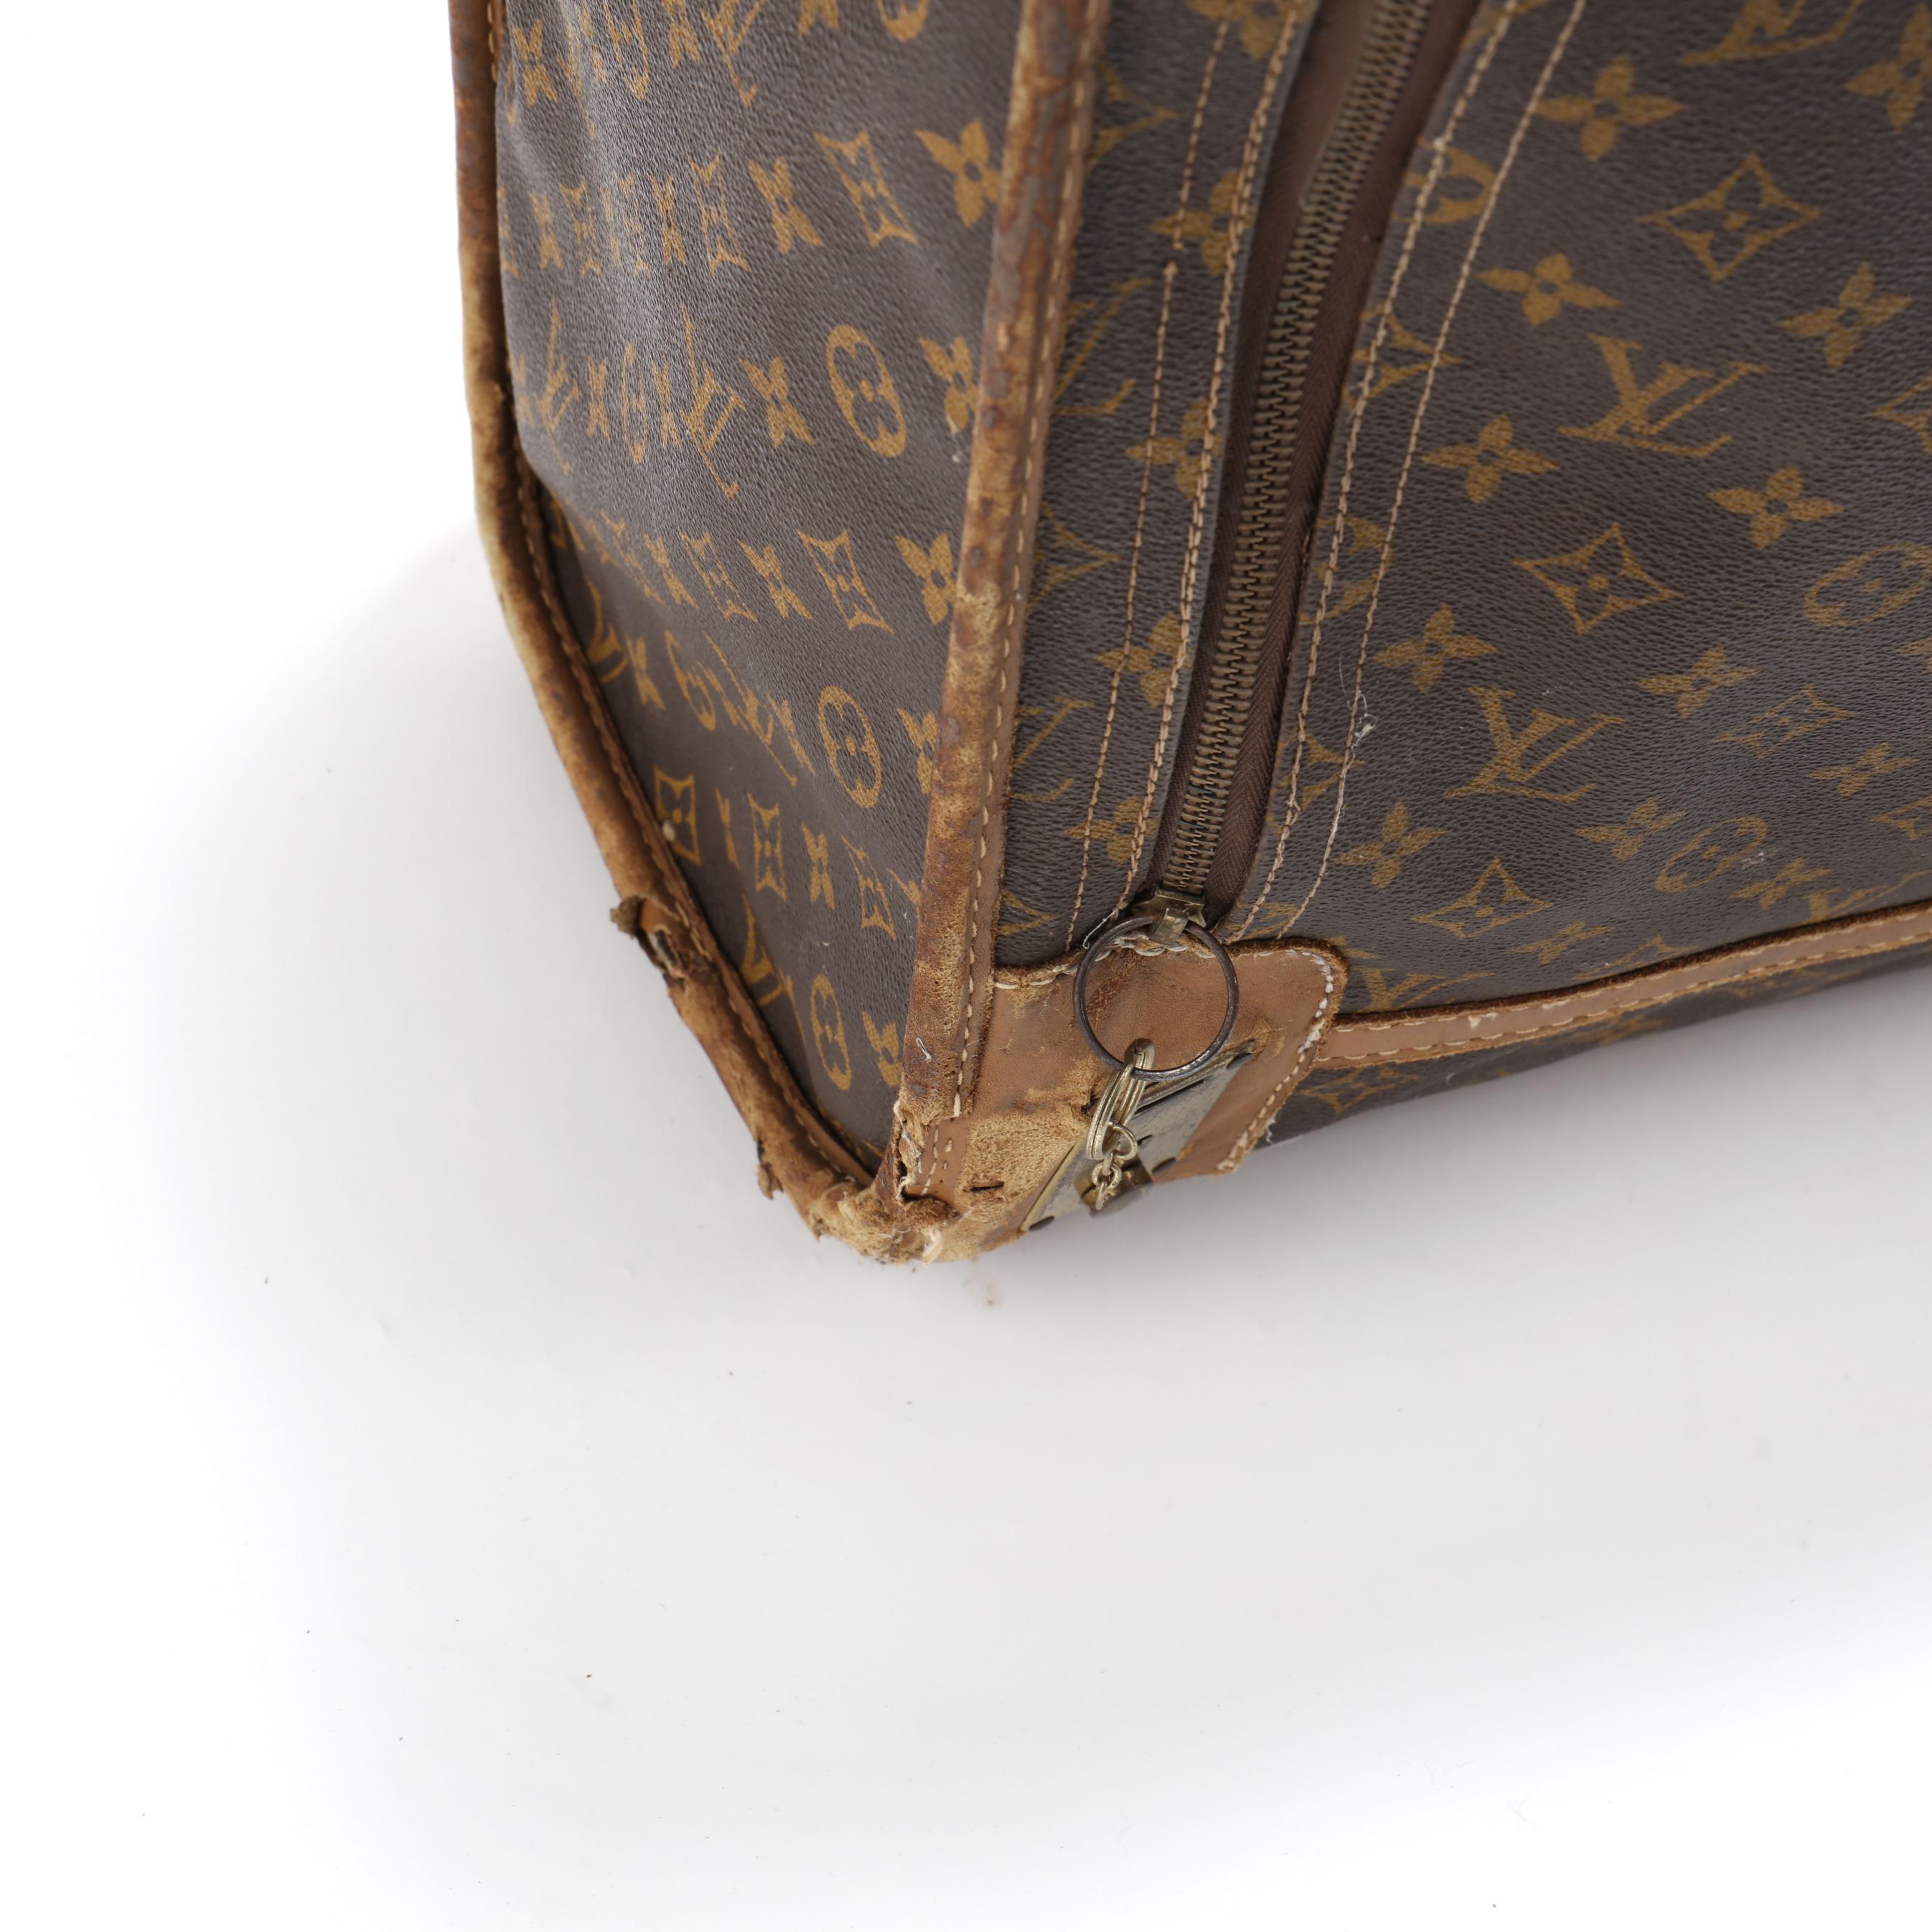 French Company for Louis Vuitton Shoe Bag and Pullman Suitcase